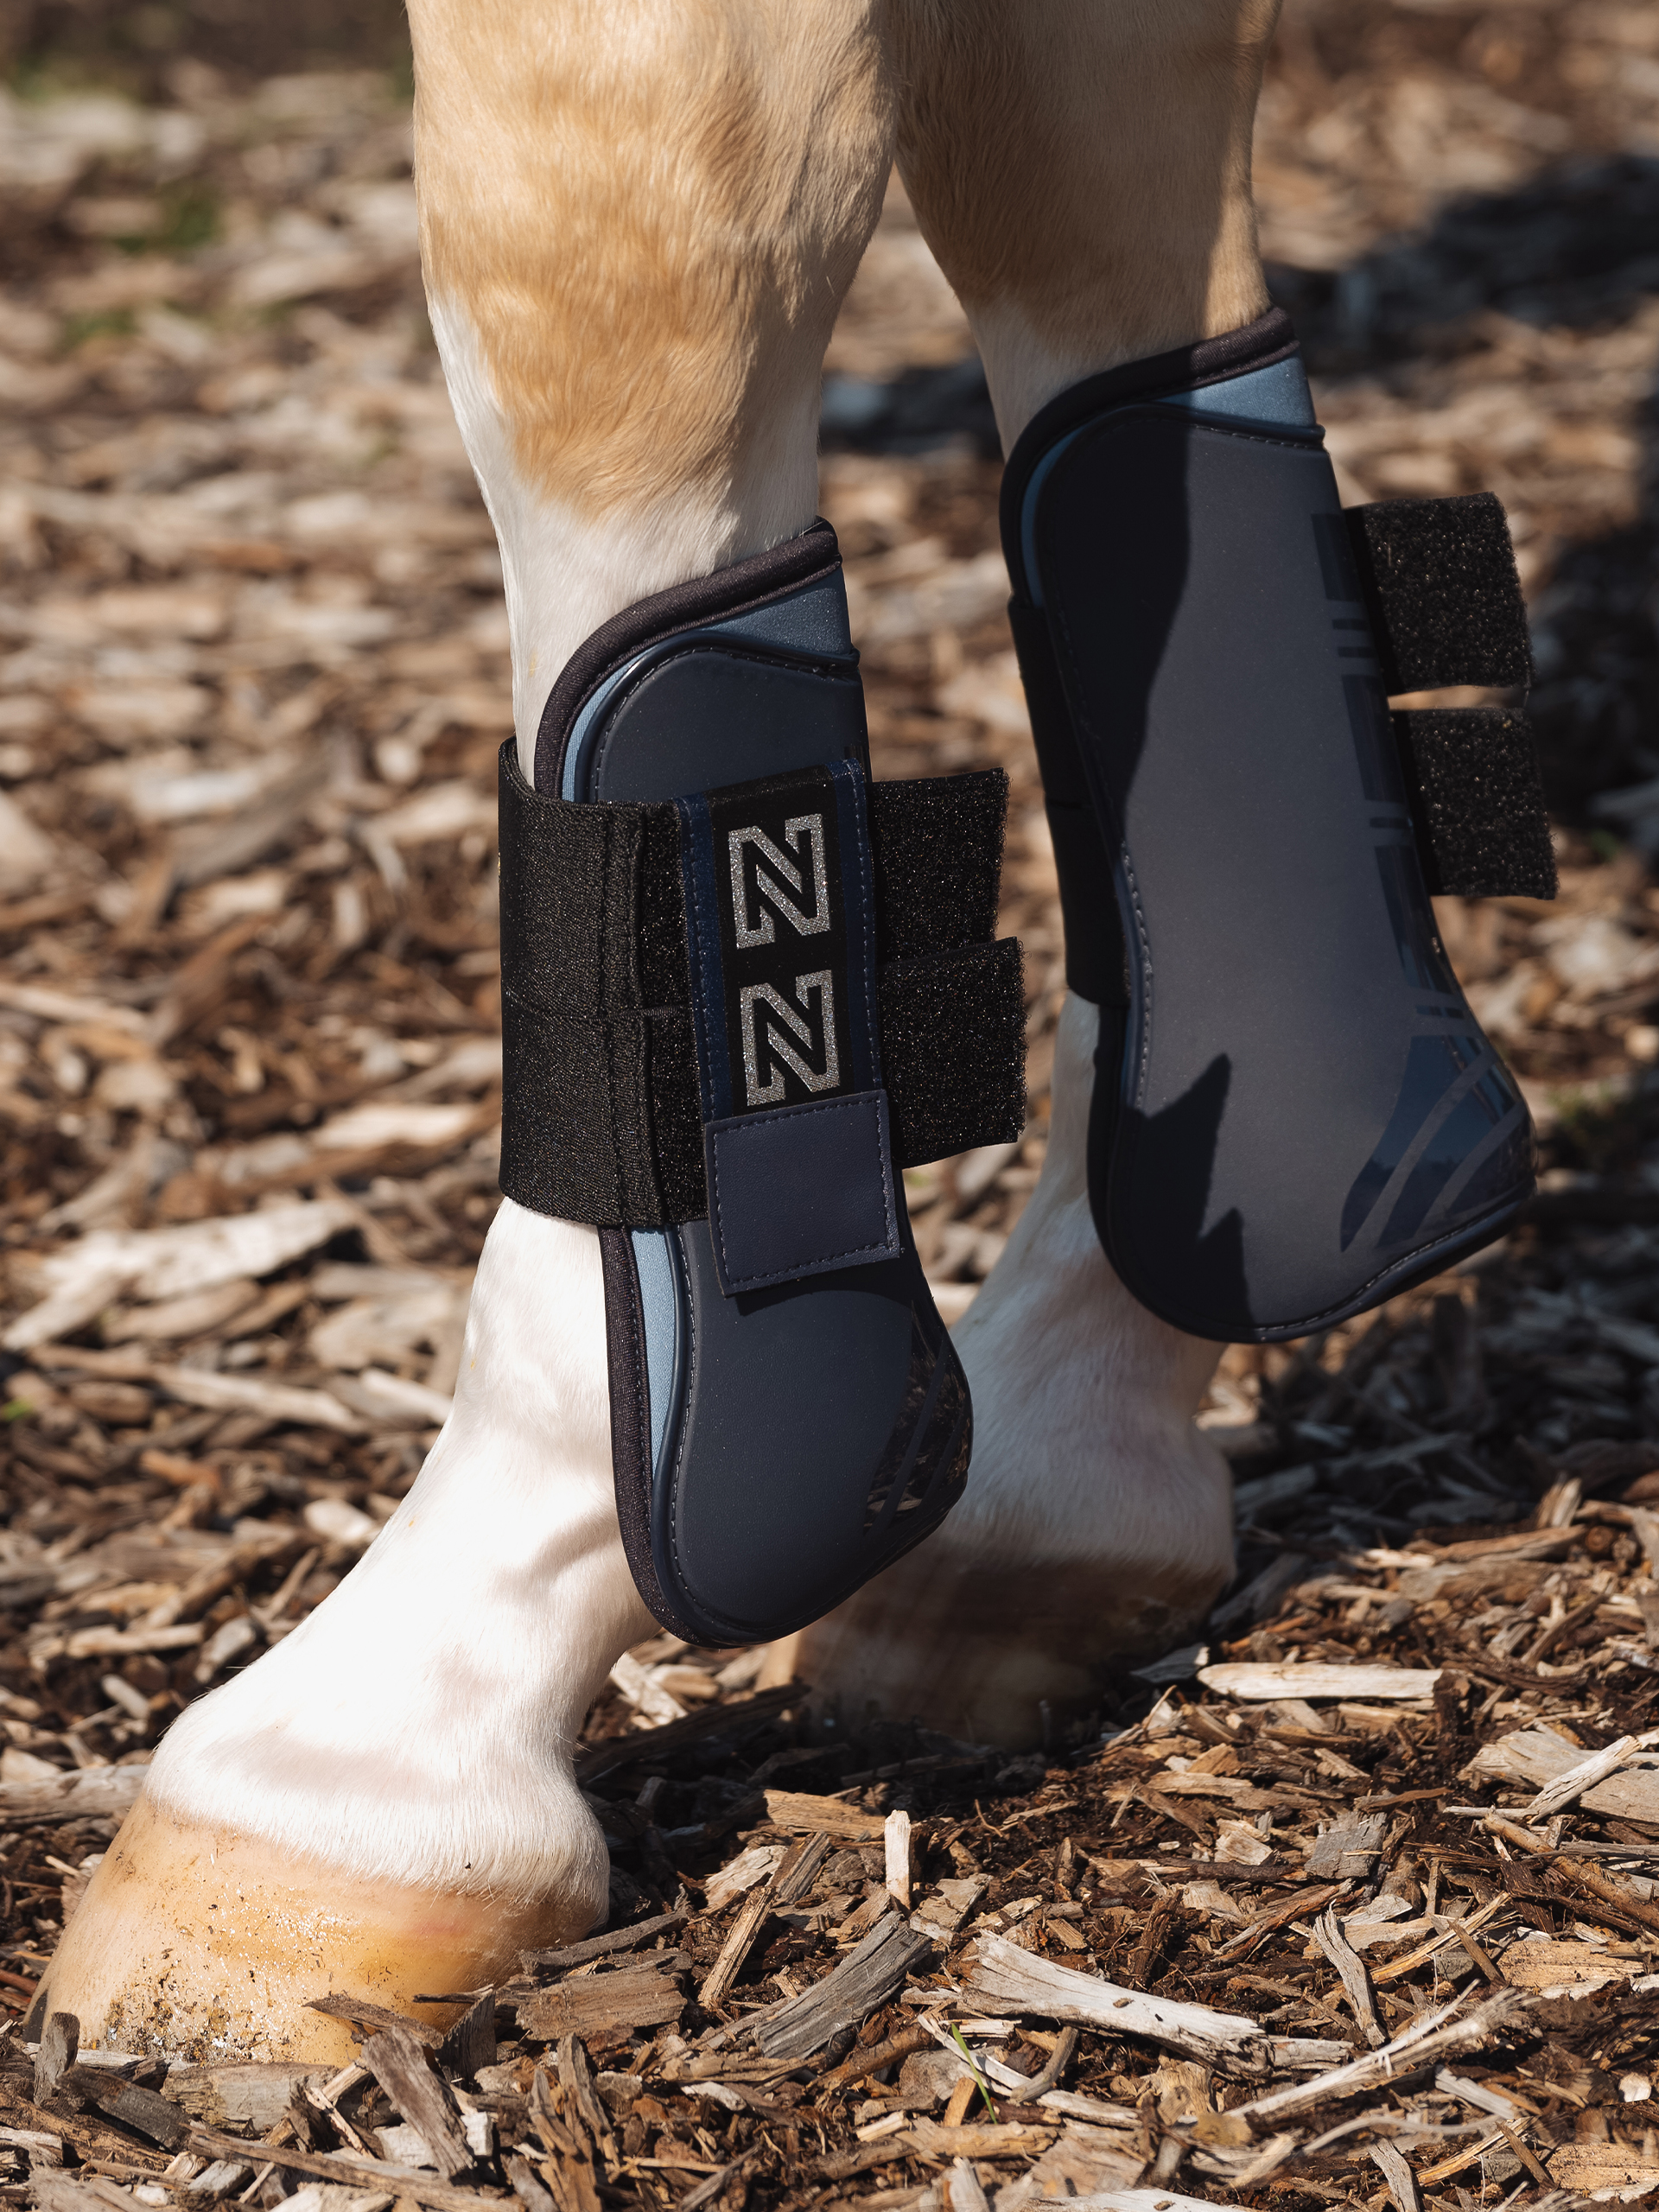  Tendon Boots with N logo